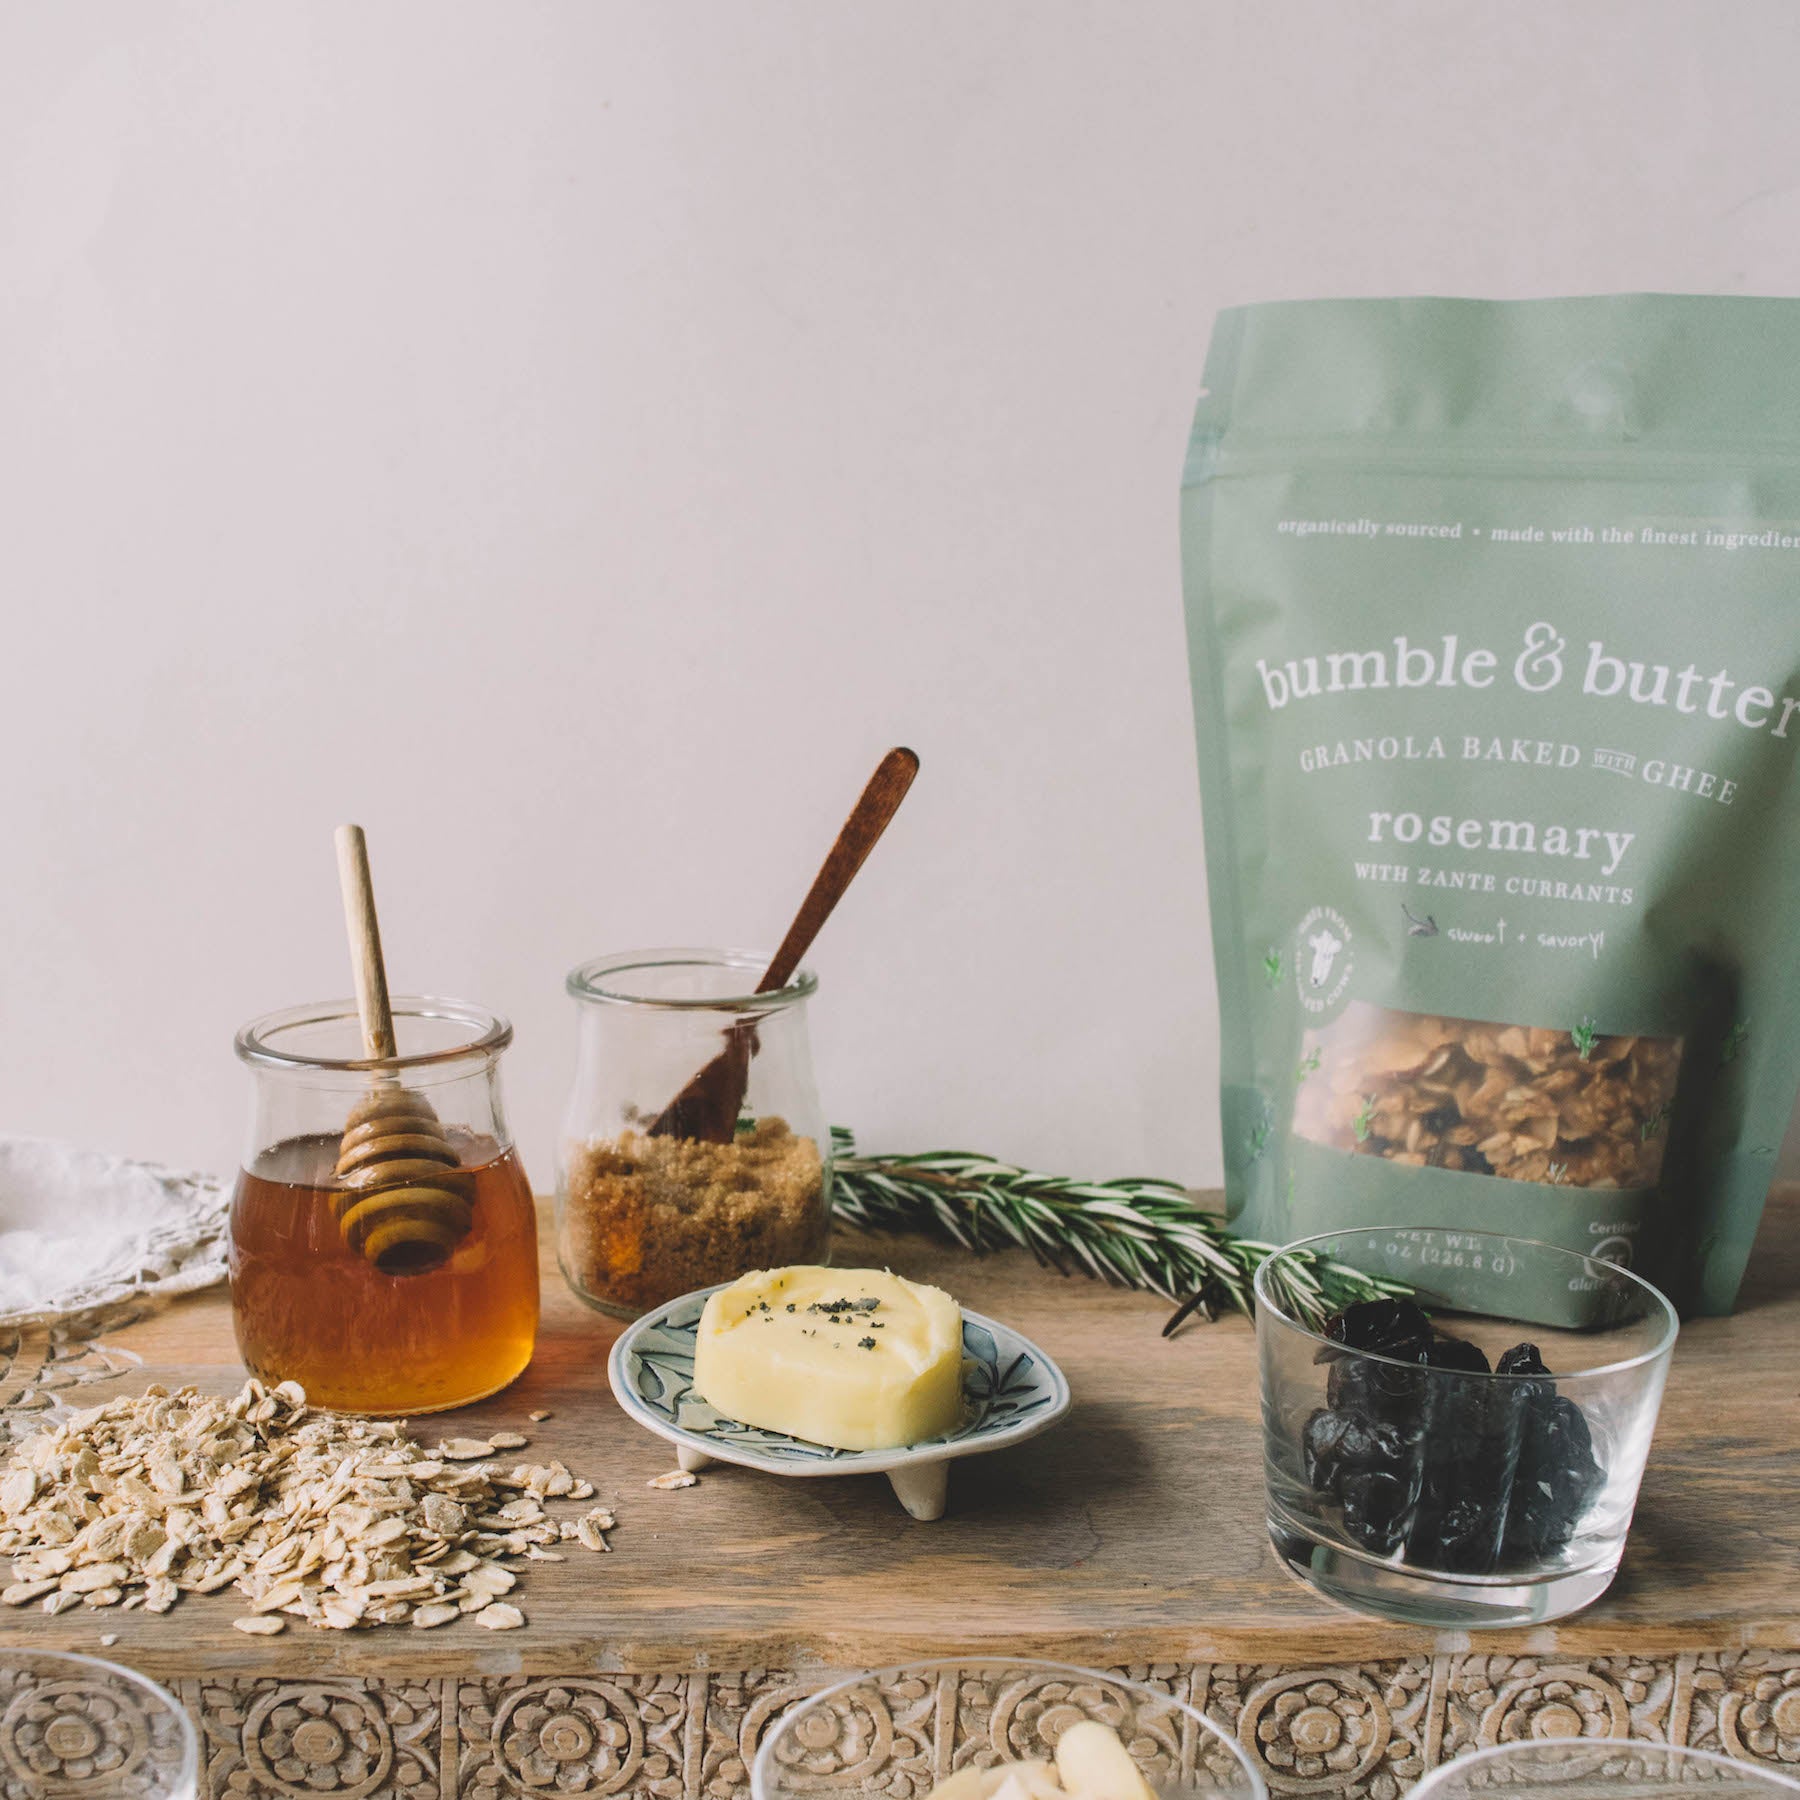 bumble & butter granola baked with grass-fed ghee locally sourced sustainable rosemary aged cheddar vanilla bean recipe locations Erewhon Market Plum Market Los Angeles Health food store all natural healthy gluten-free diet 